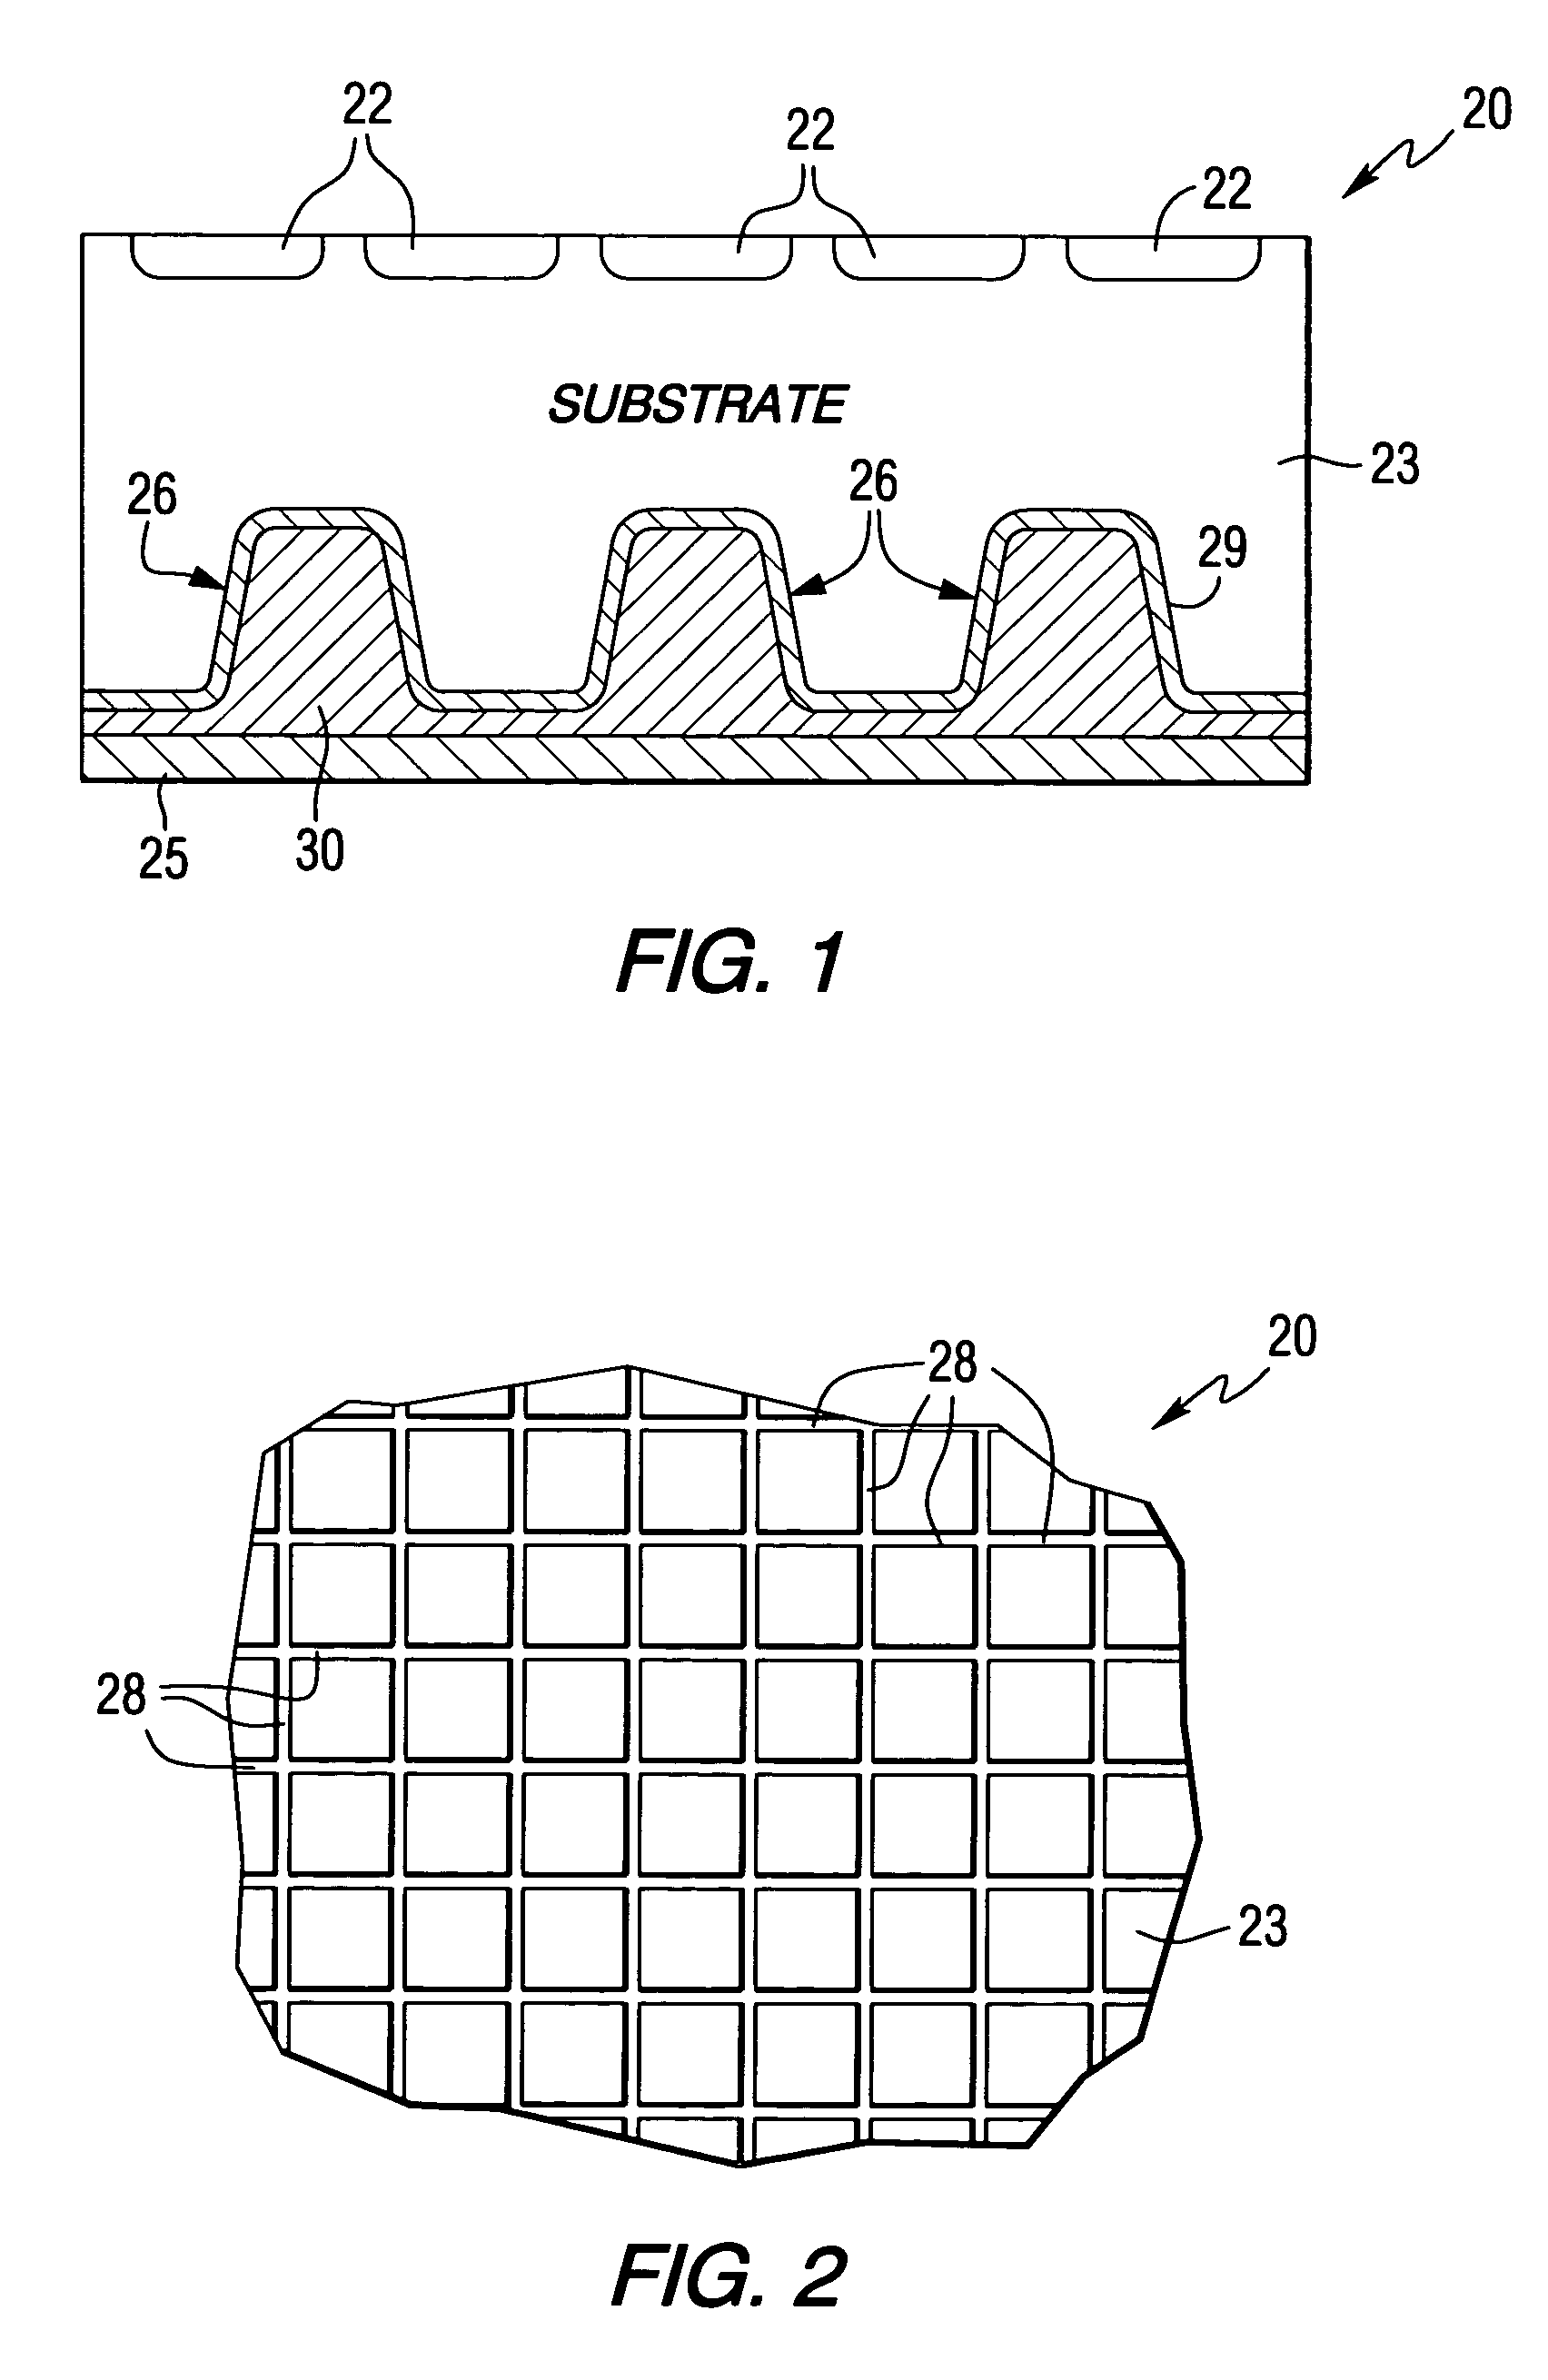 Semiconductor device having reduced effective substrate resistivity and associated methods